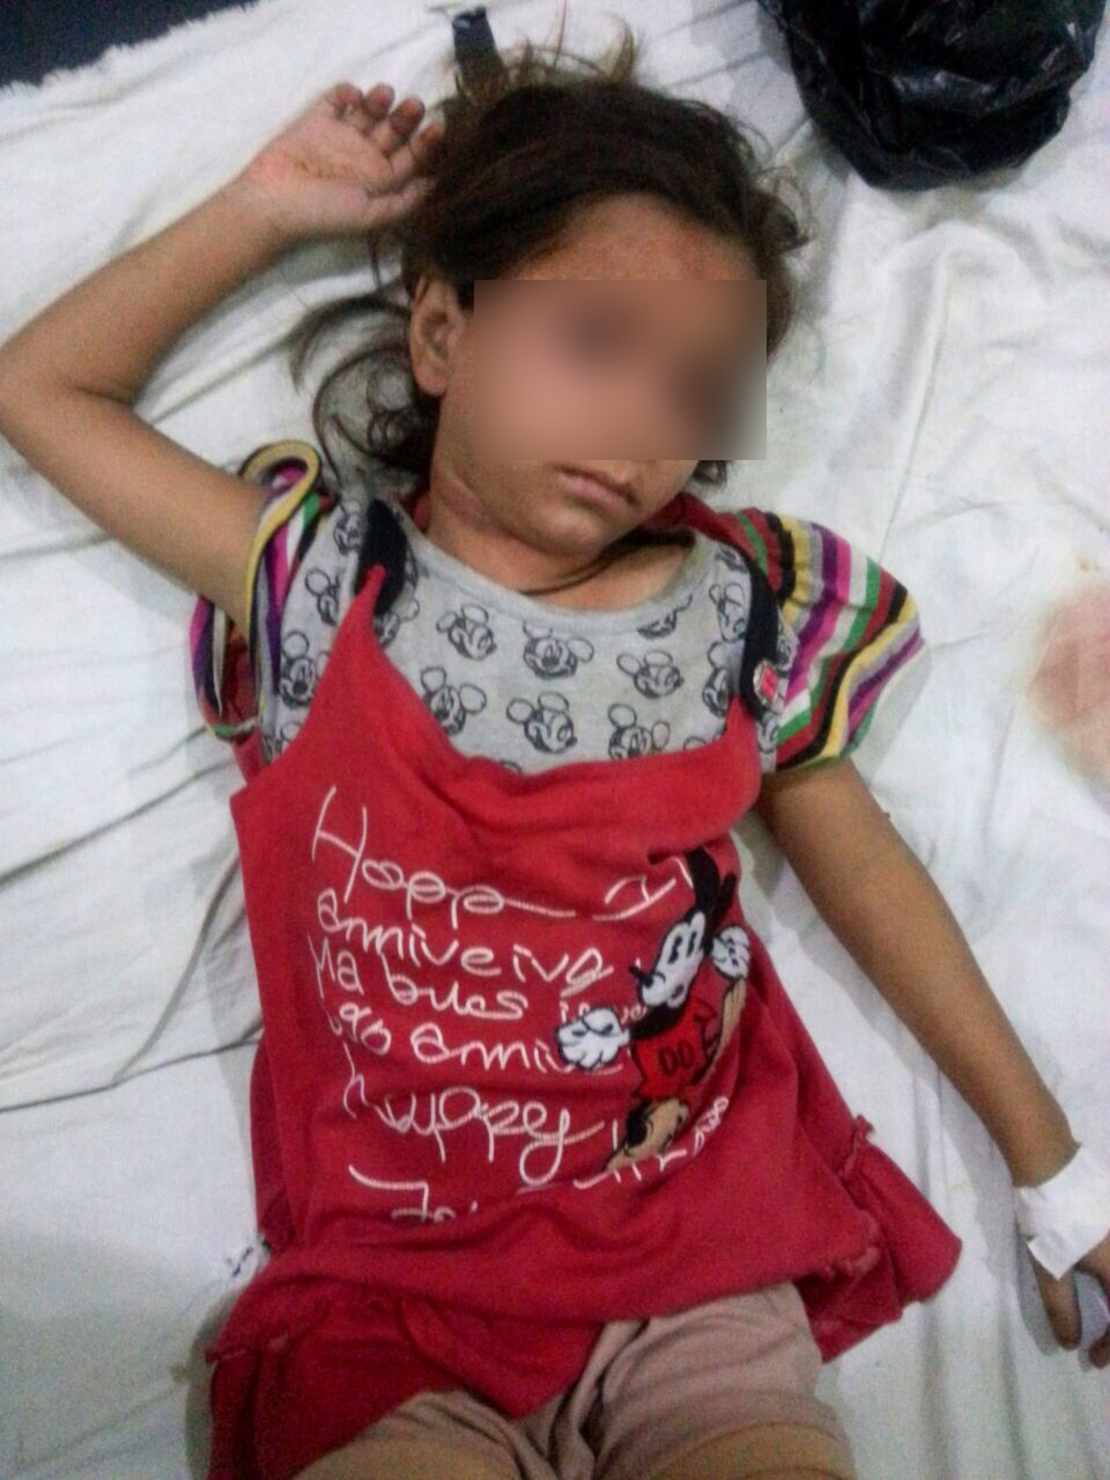 The little girl who was allegedly buried alive after an attack has been discharged from the hospital.